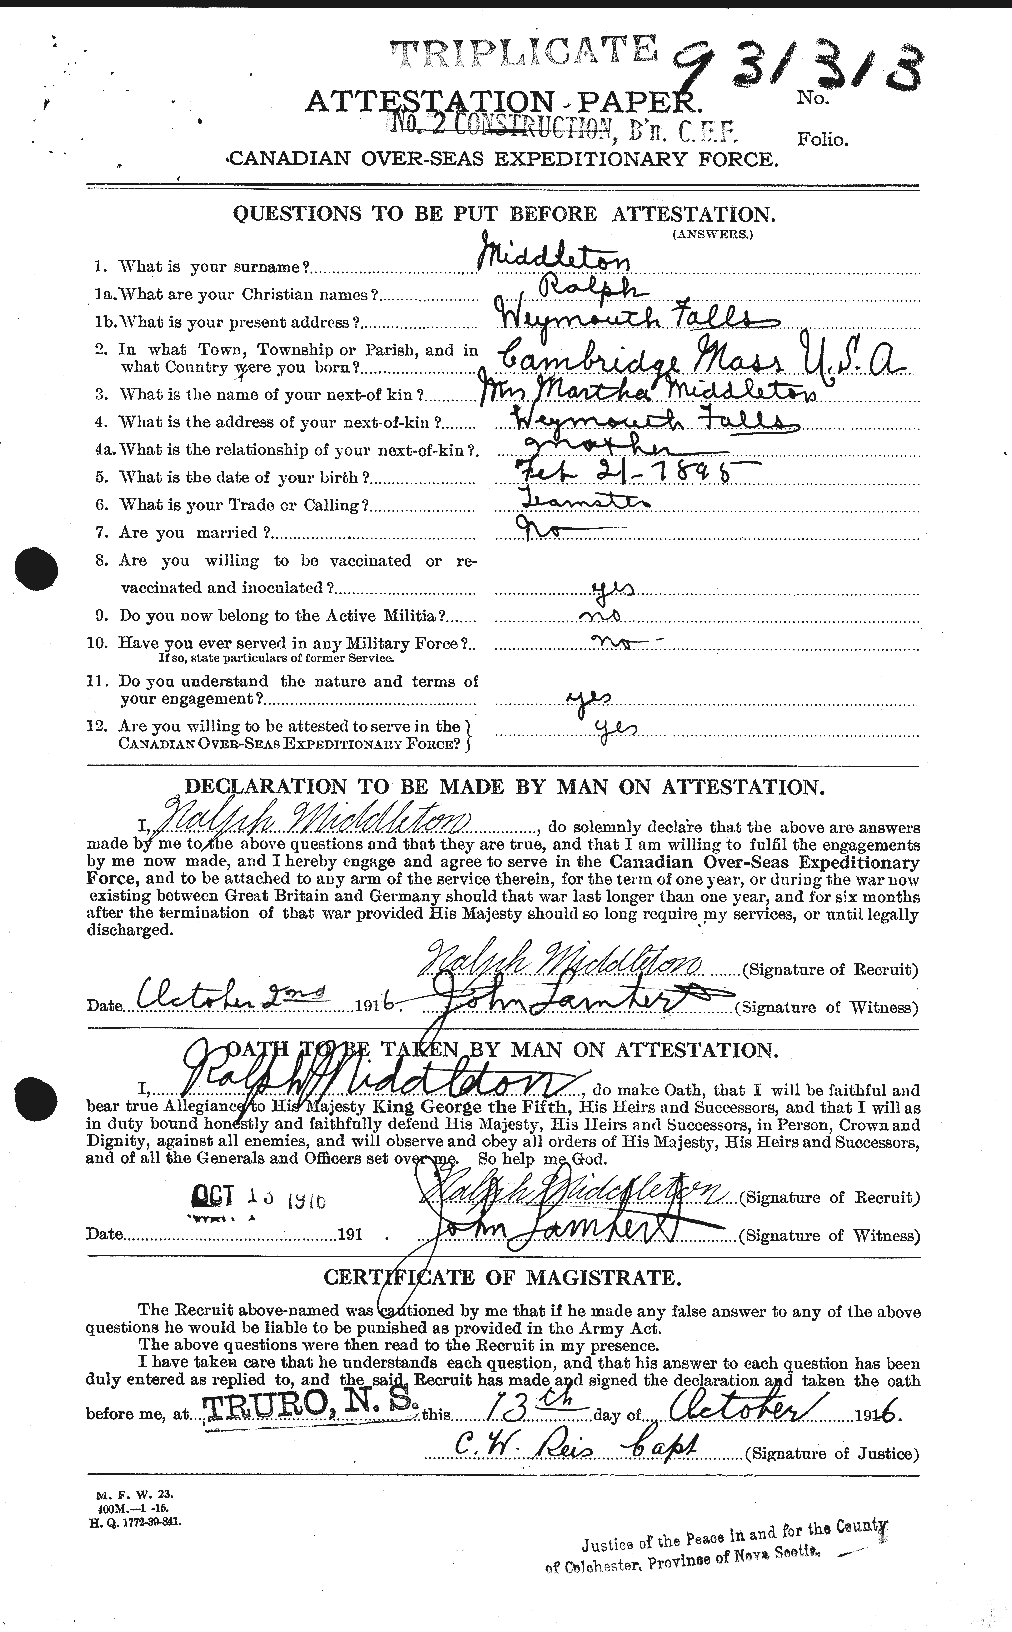 Personnel Records of the First World War - CEF 493154a